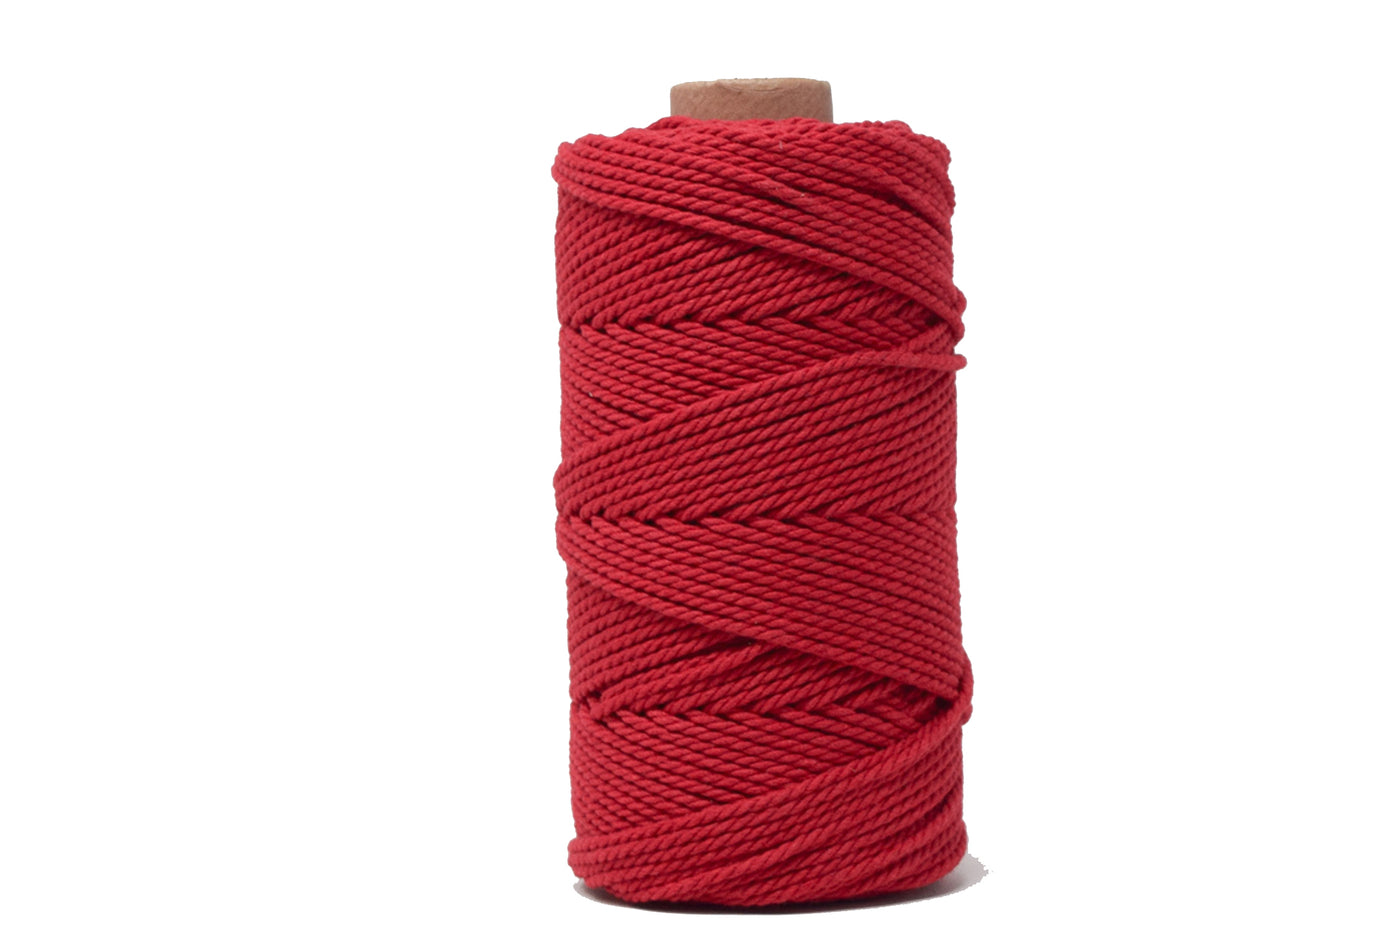 COTTON ROPE ZERO WASTE 2 MM - 3 PLY - RED COLOR